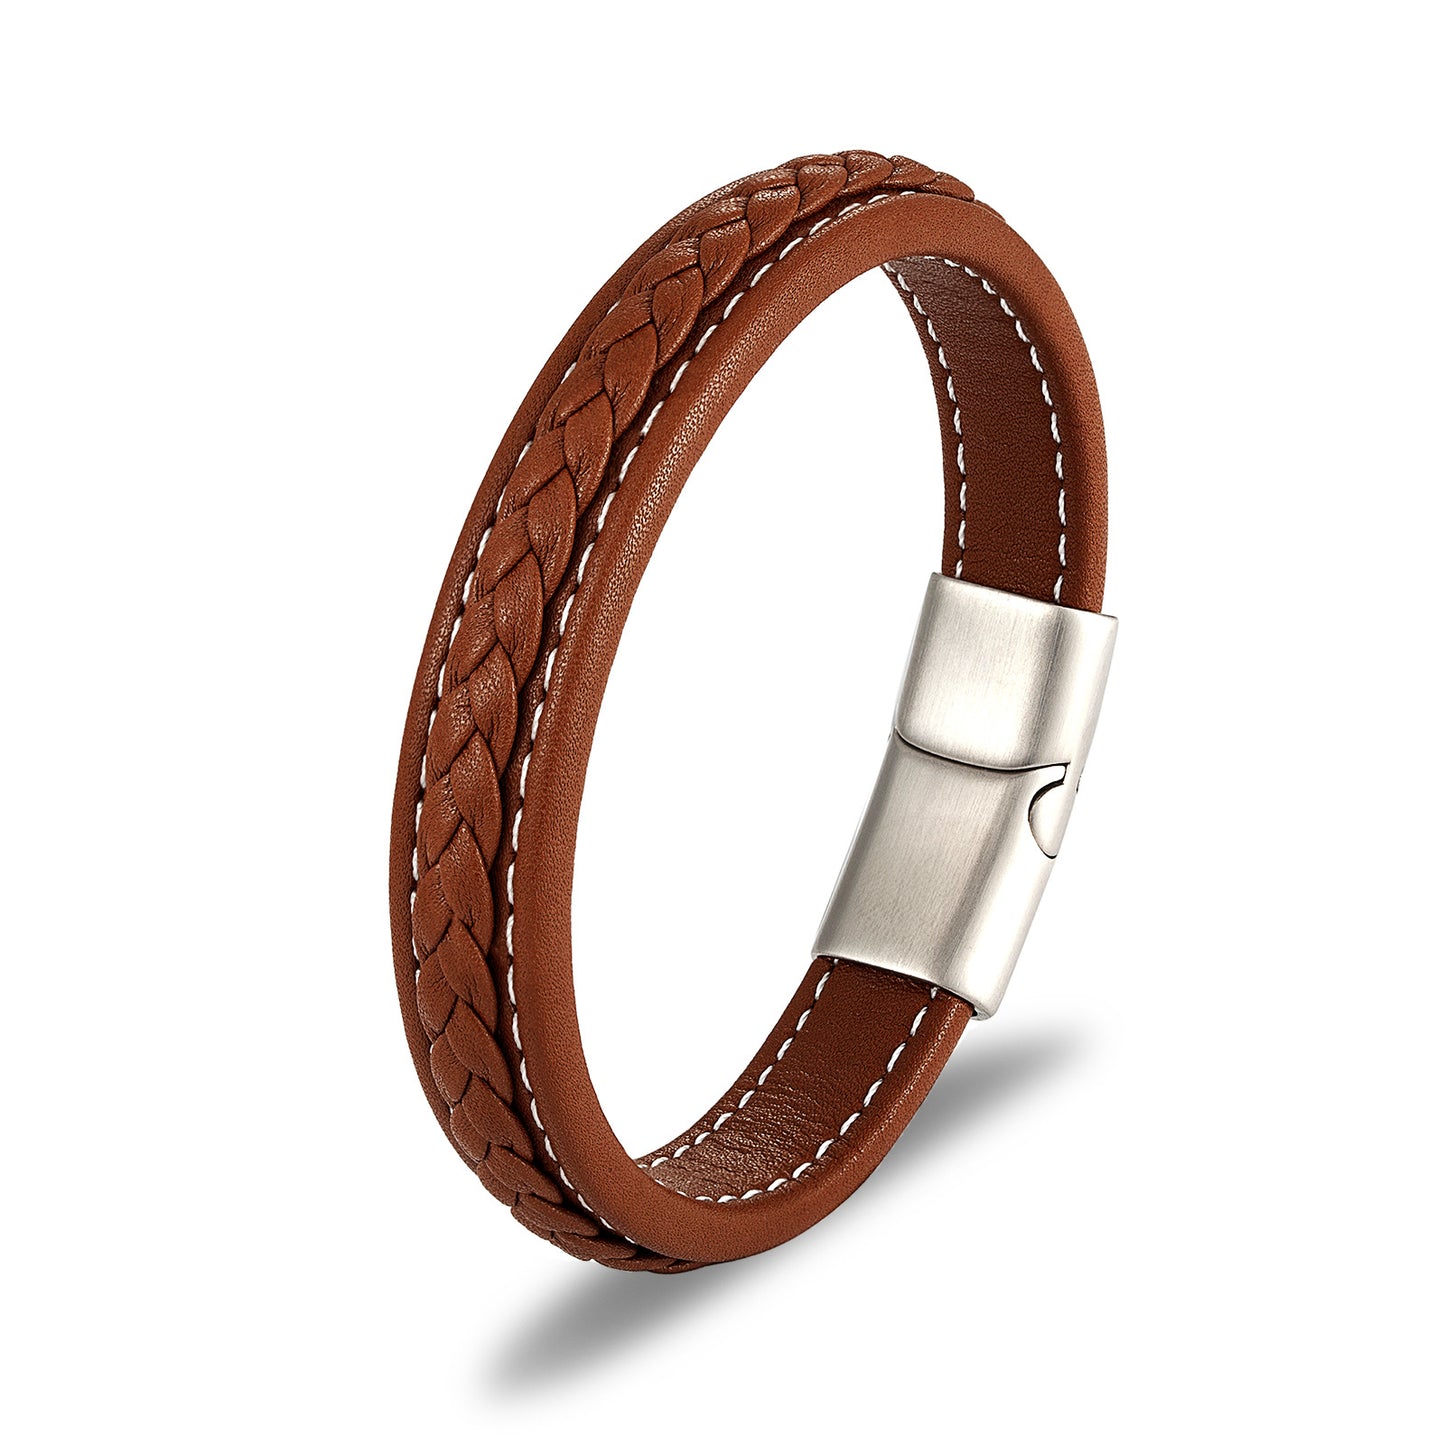 Classic leather rope bracelet stainless steel magnet buckle bracelet cowhide braided mixed color men's bracelet